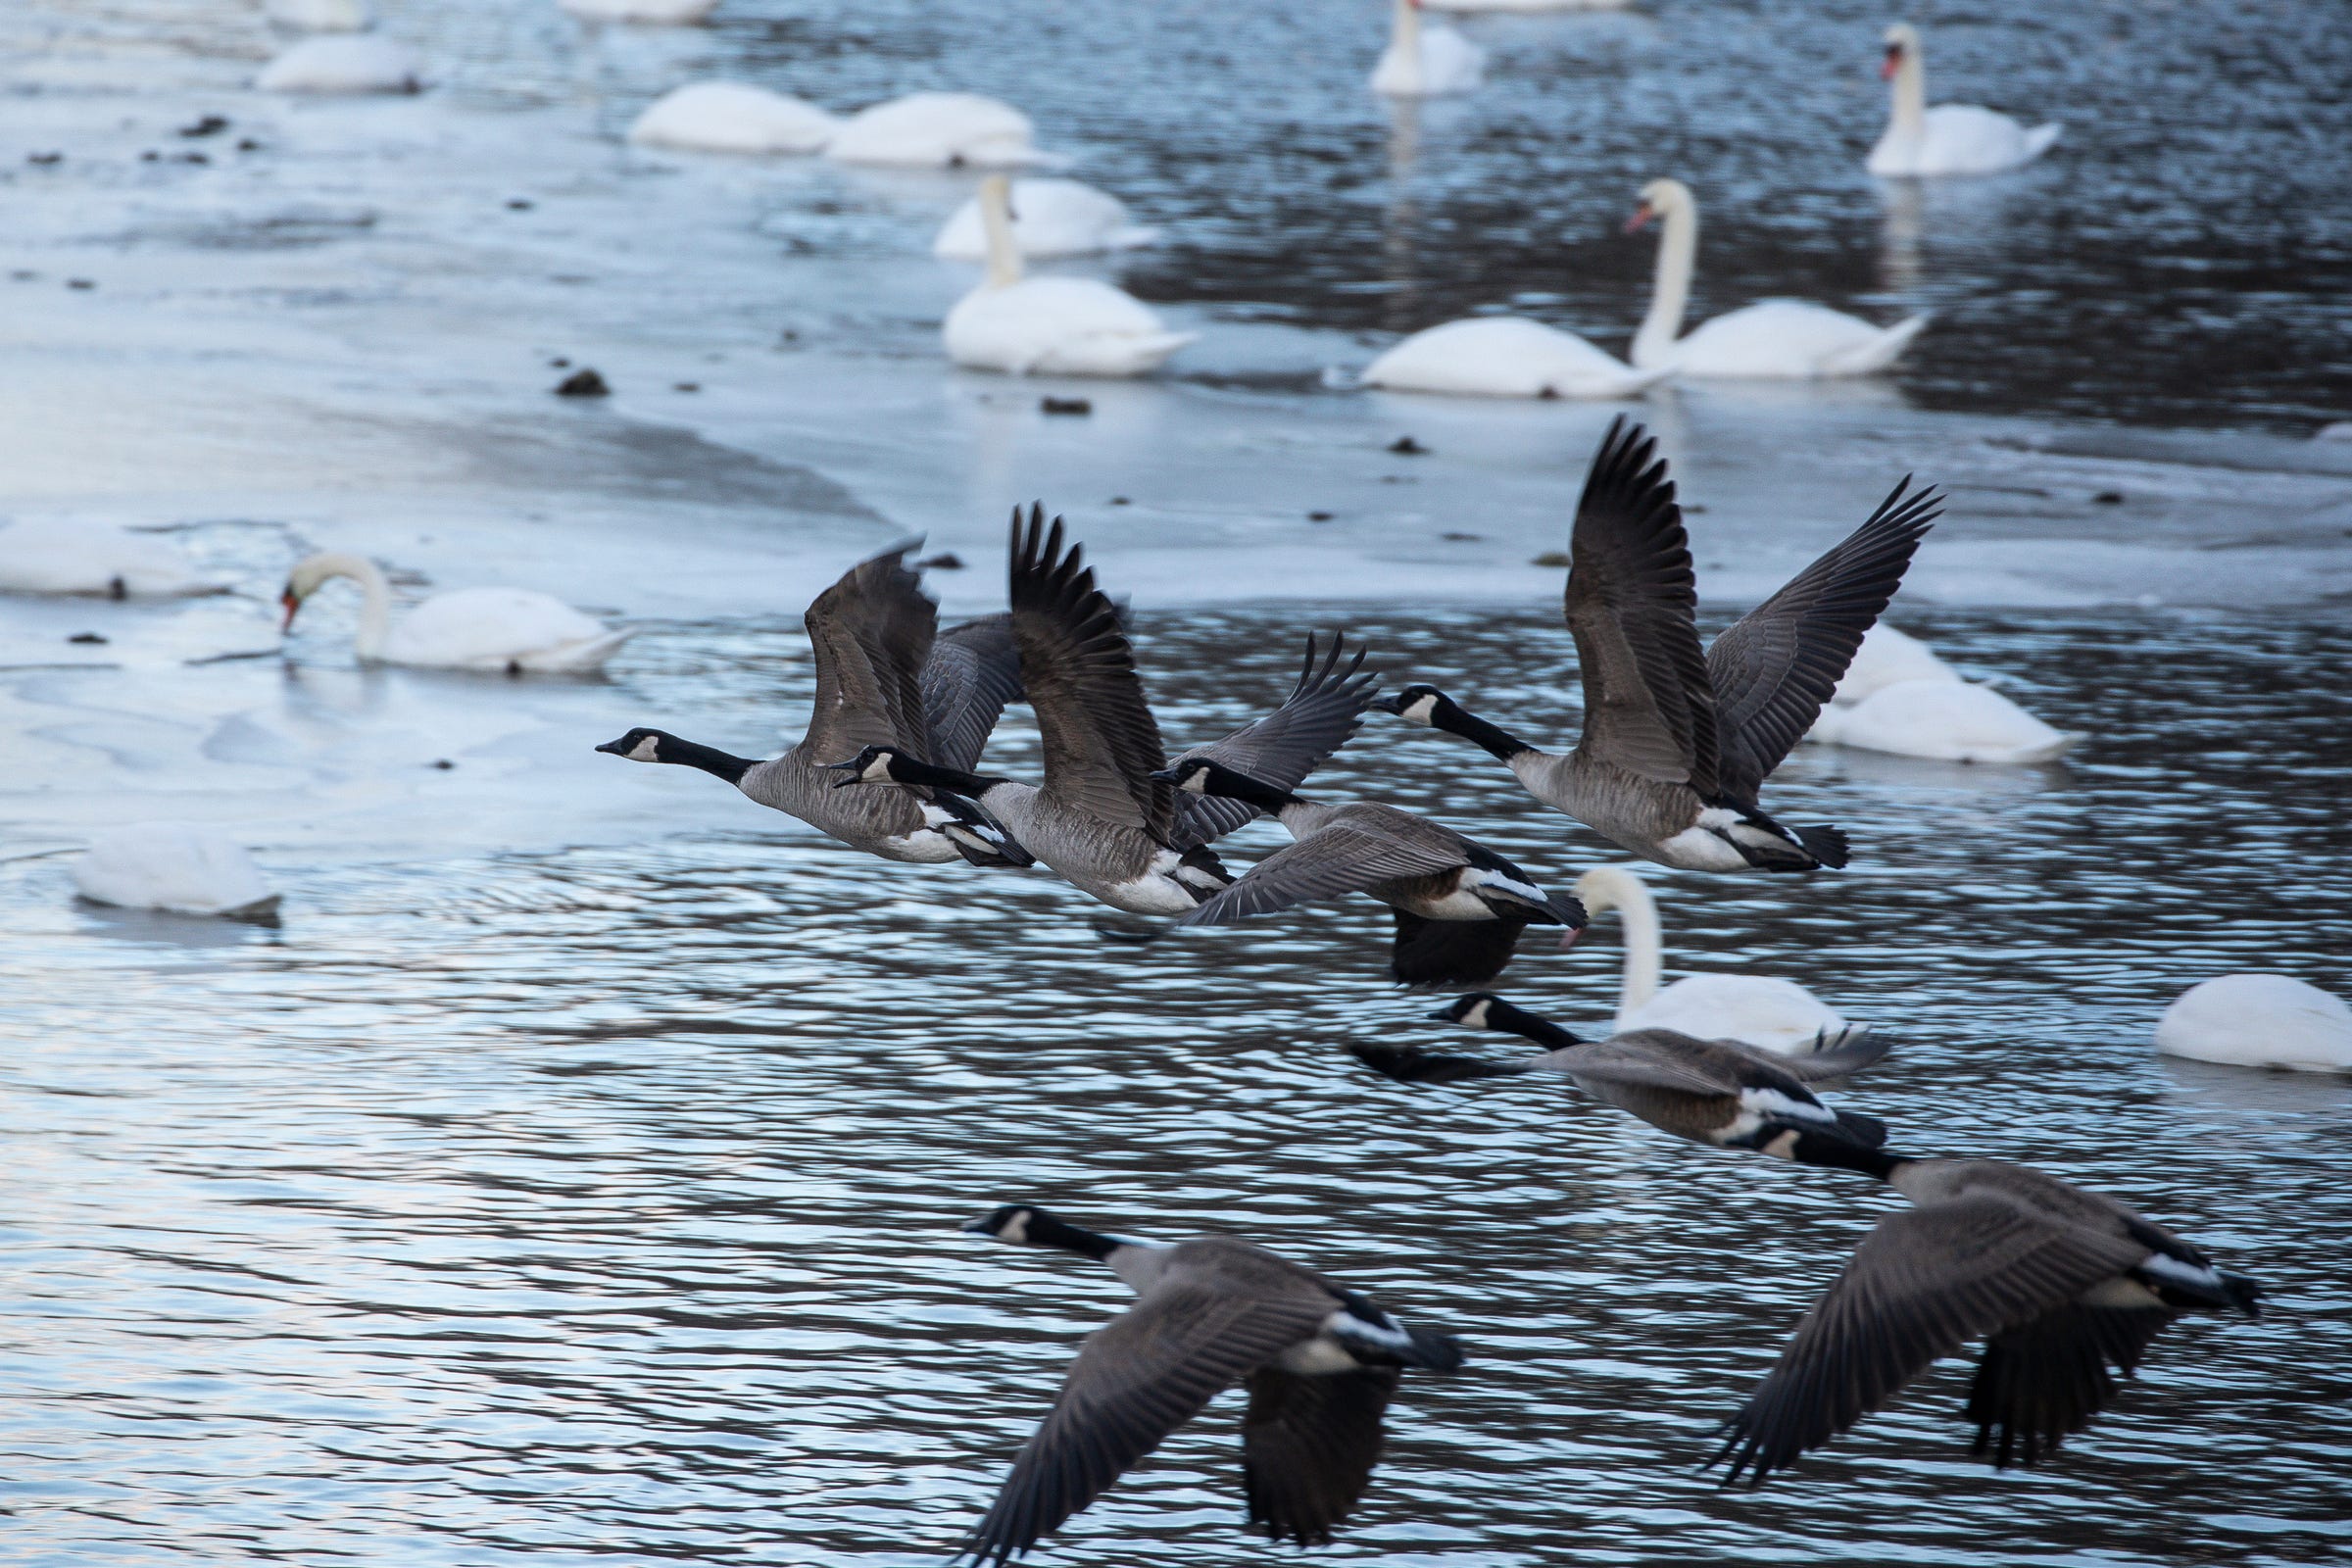 Canadian geese fly over Huron River at the Kensington Metropark in Milford on Monday, Jan. 10, 2022.